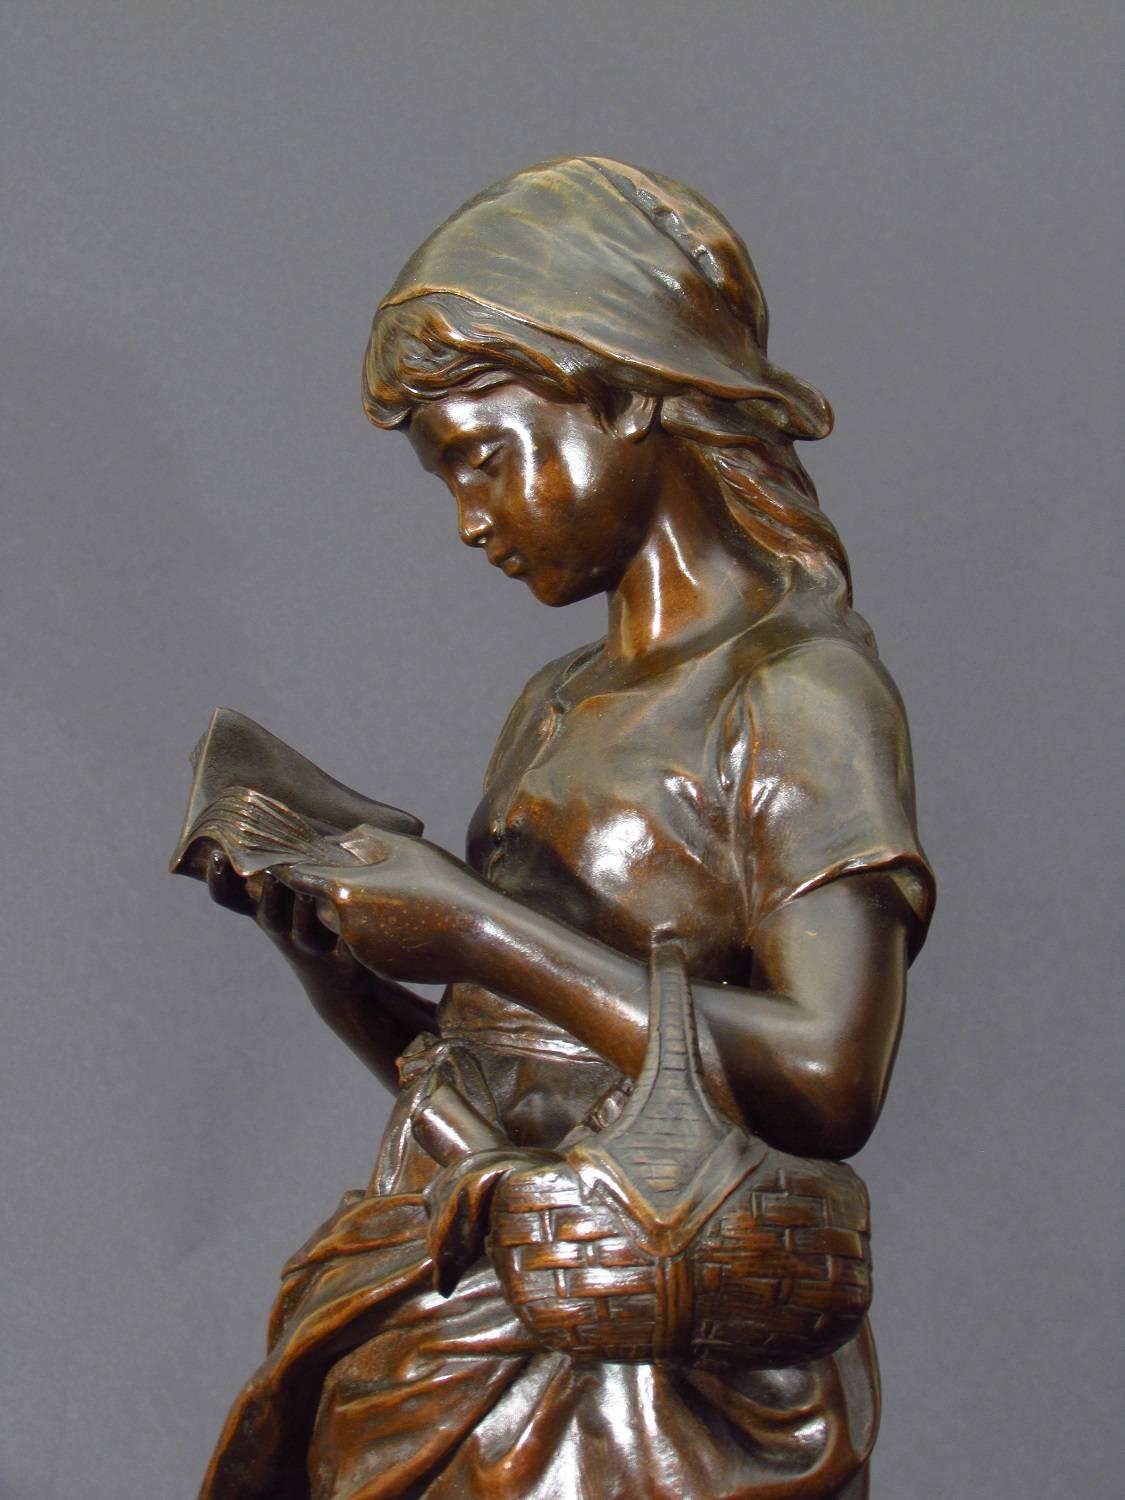 The Reader by Mathurin Moreau

Antique french bronze statue of a young lady reading.

Signed:  Moreau Math.  Hors Concours

Circa 1900    Height: 21.5 inches


Mathurin Moreau (1822-1912)

Born November 1822 in Dijon and died February 1912 in